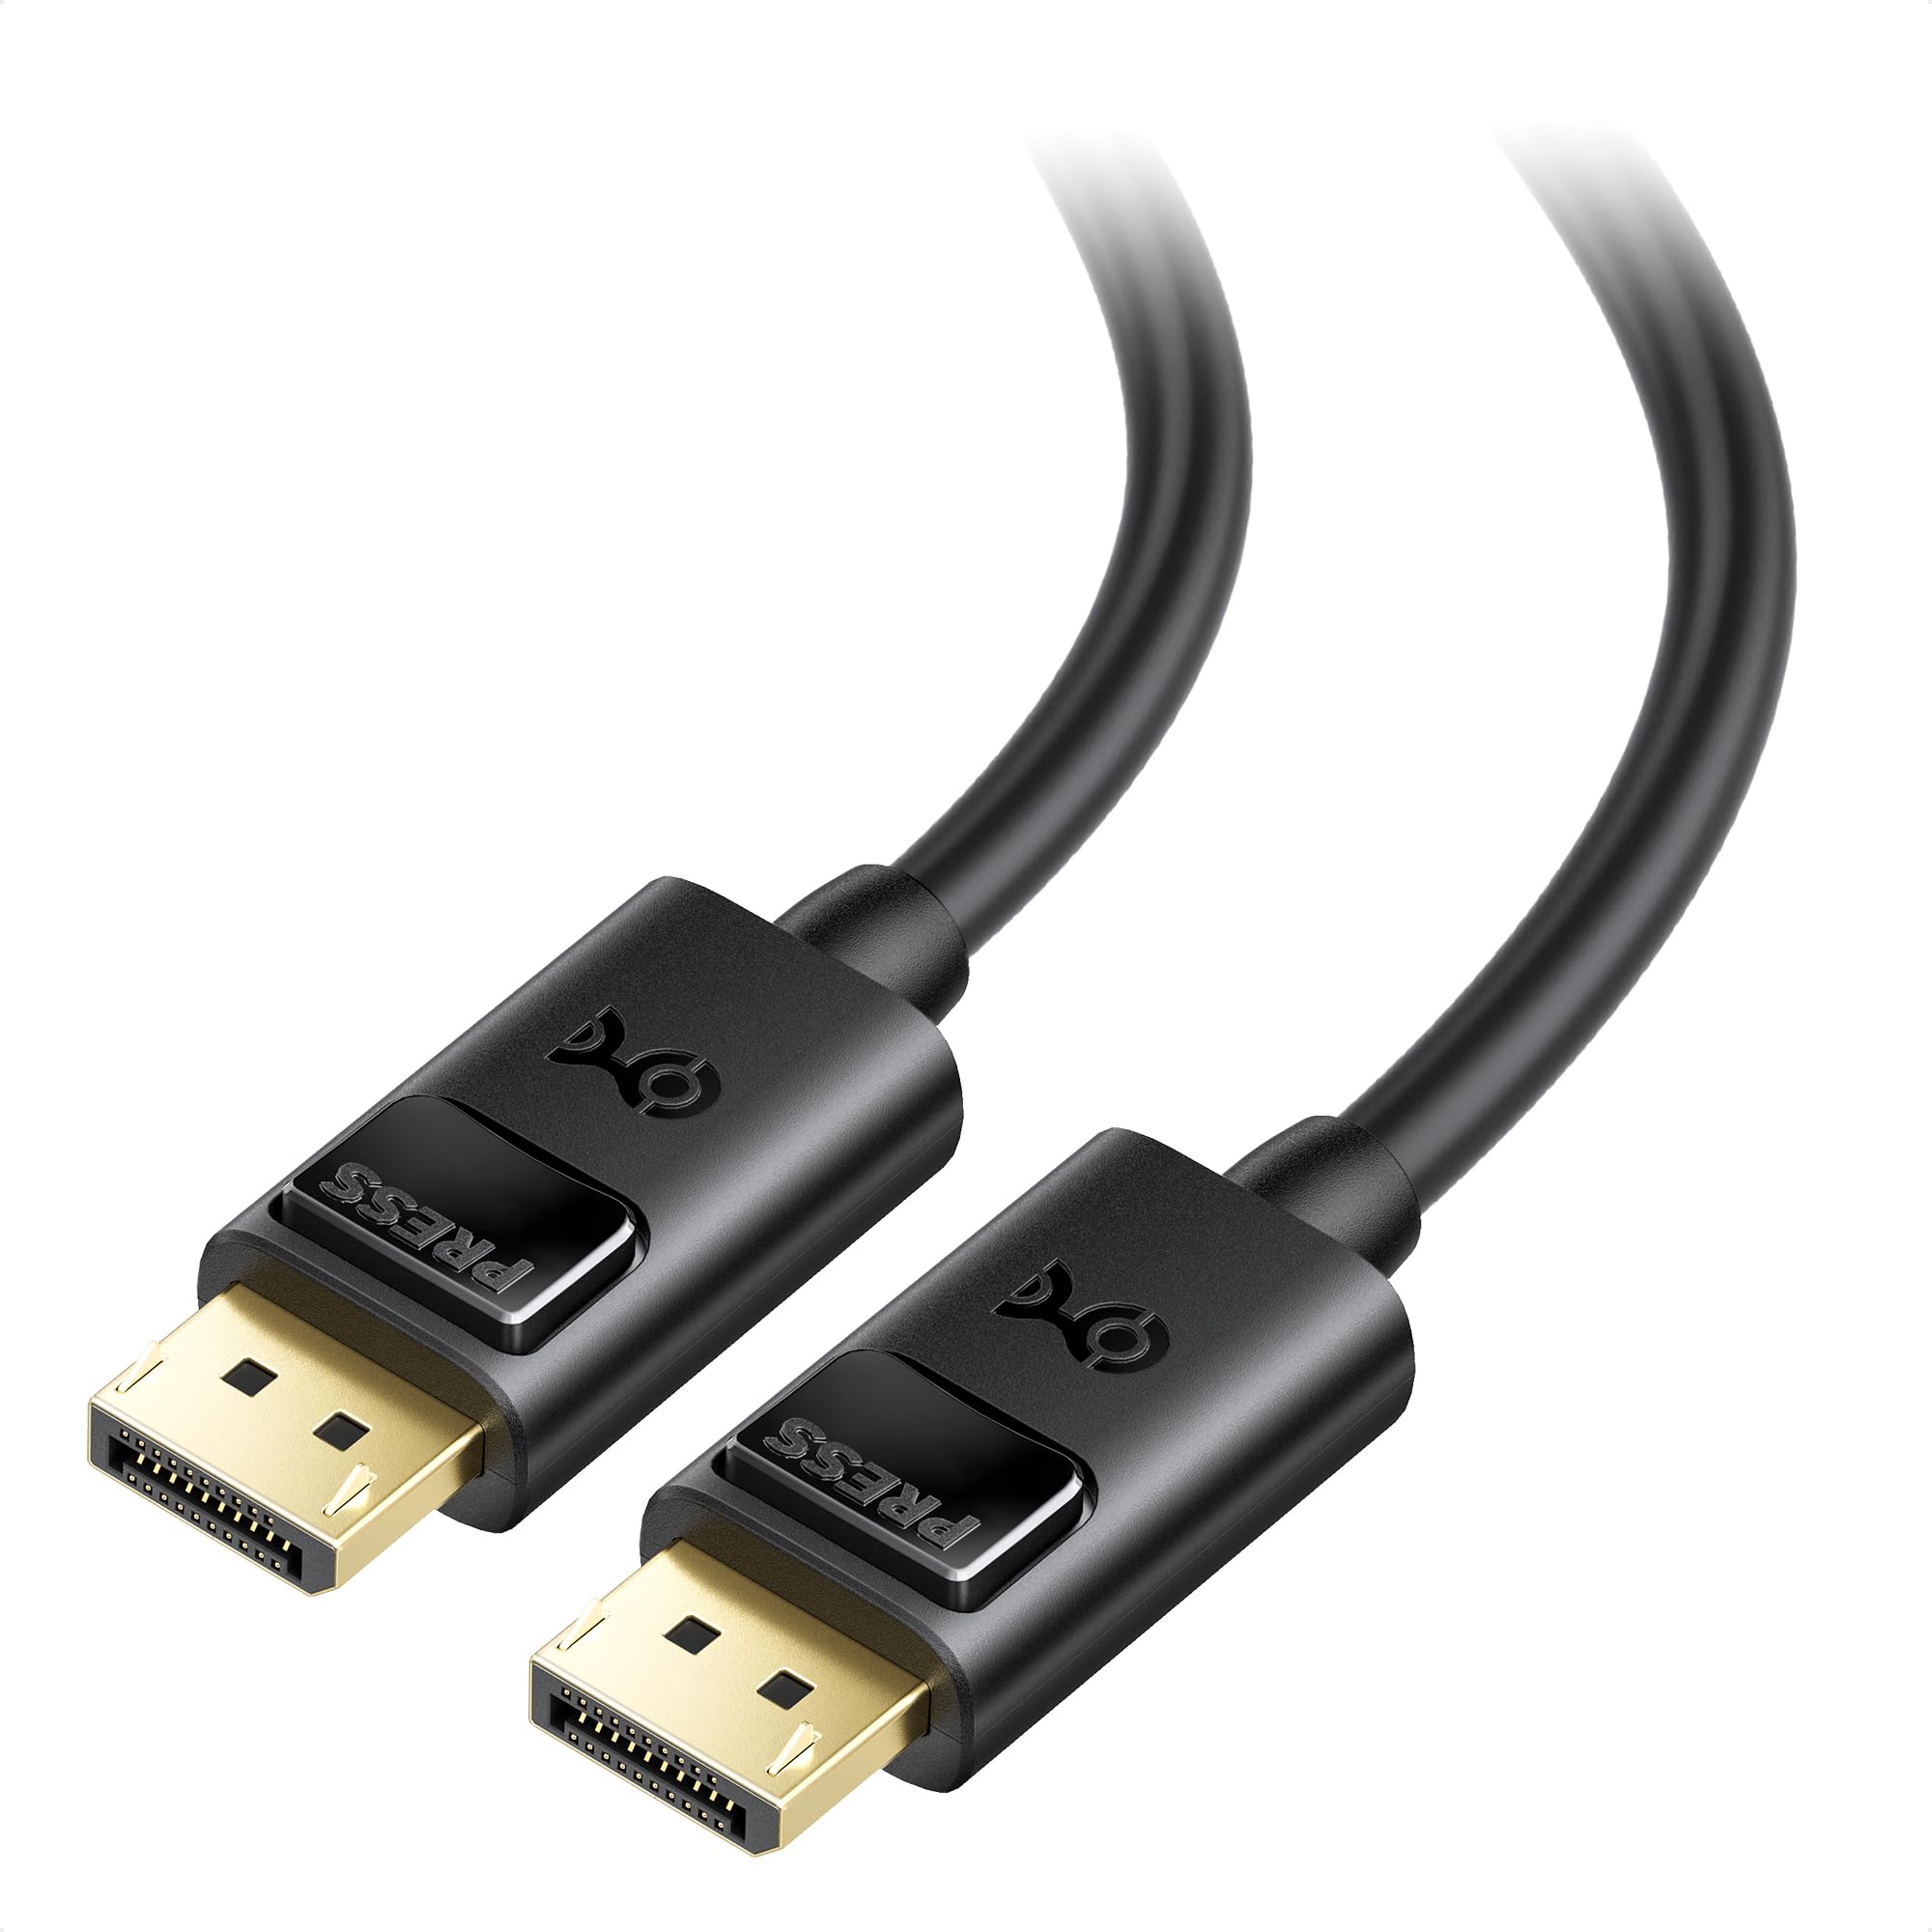 Book Cover Cable Matters 4K DisplayPort to DisplayPort Cable (DP to DP Cable, Display Port Cable) 6 Feet - 4K 60Hz, 2K 144Hz Monitor Support